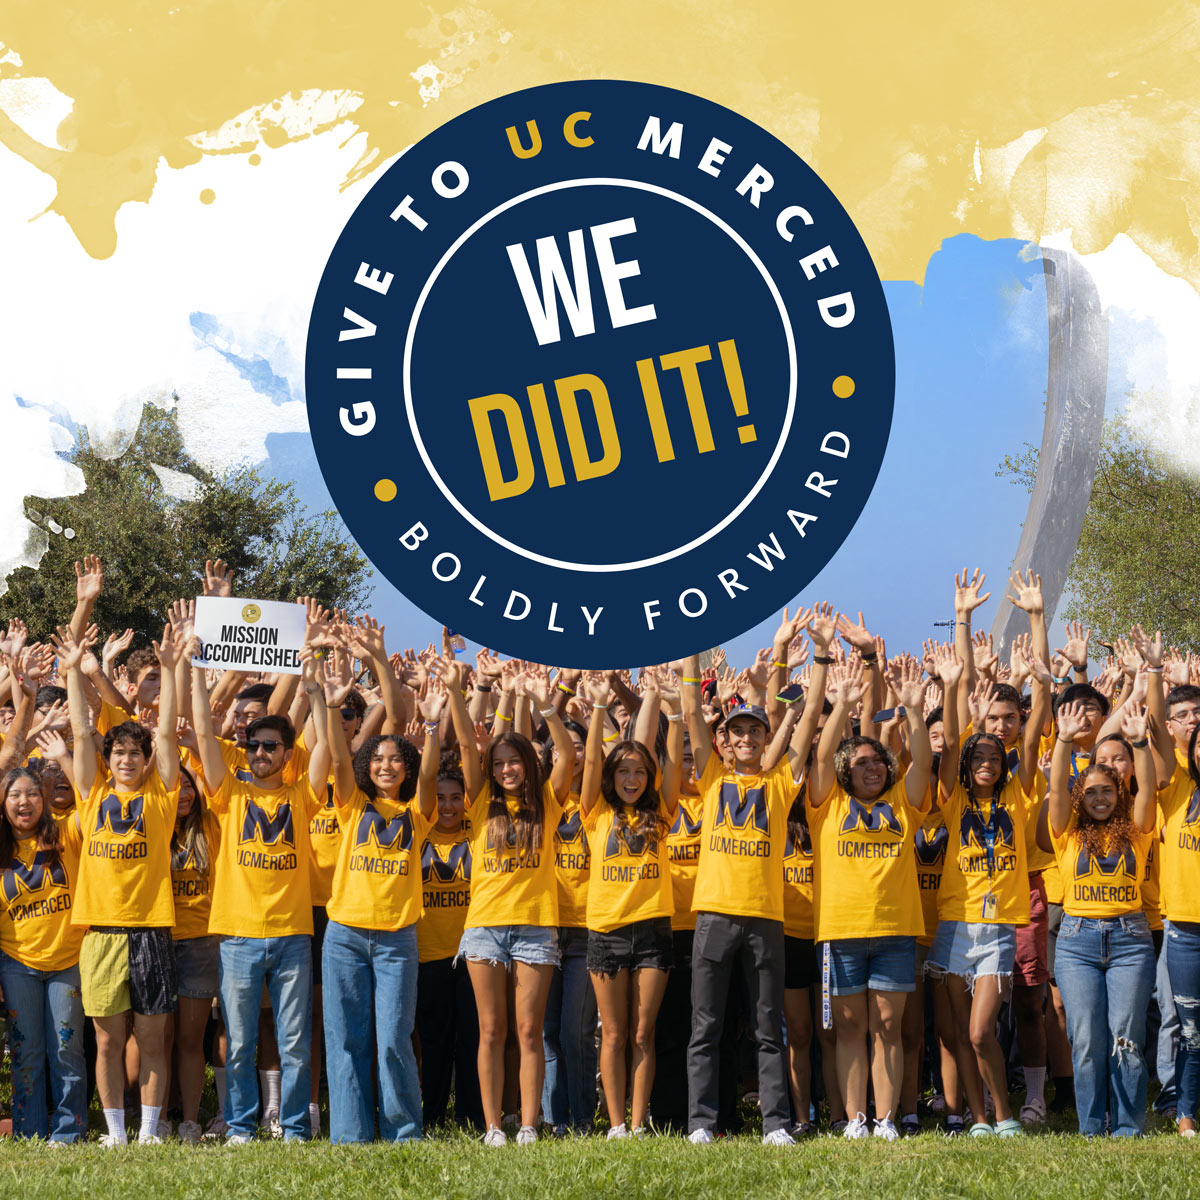 With your generous support, we have met our goal for #GiveToUCMerced! Thank you for helping to provide our Bobcats with vital resources that will transform them into the leaders and changemakers of tomorrow. You can still make a bold impact🔗 giveto.ucmerced.edu.